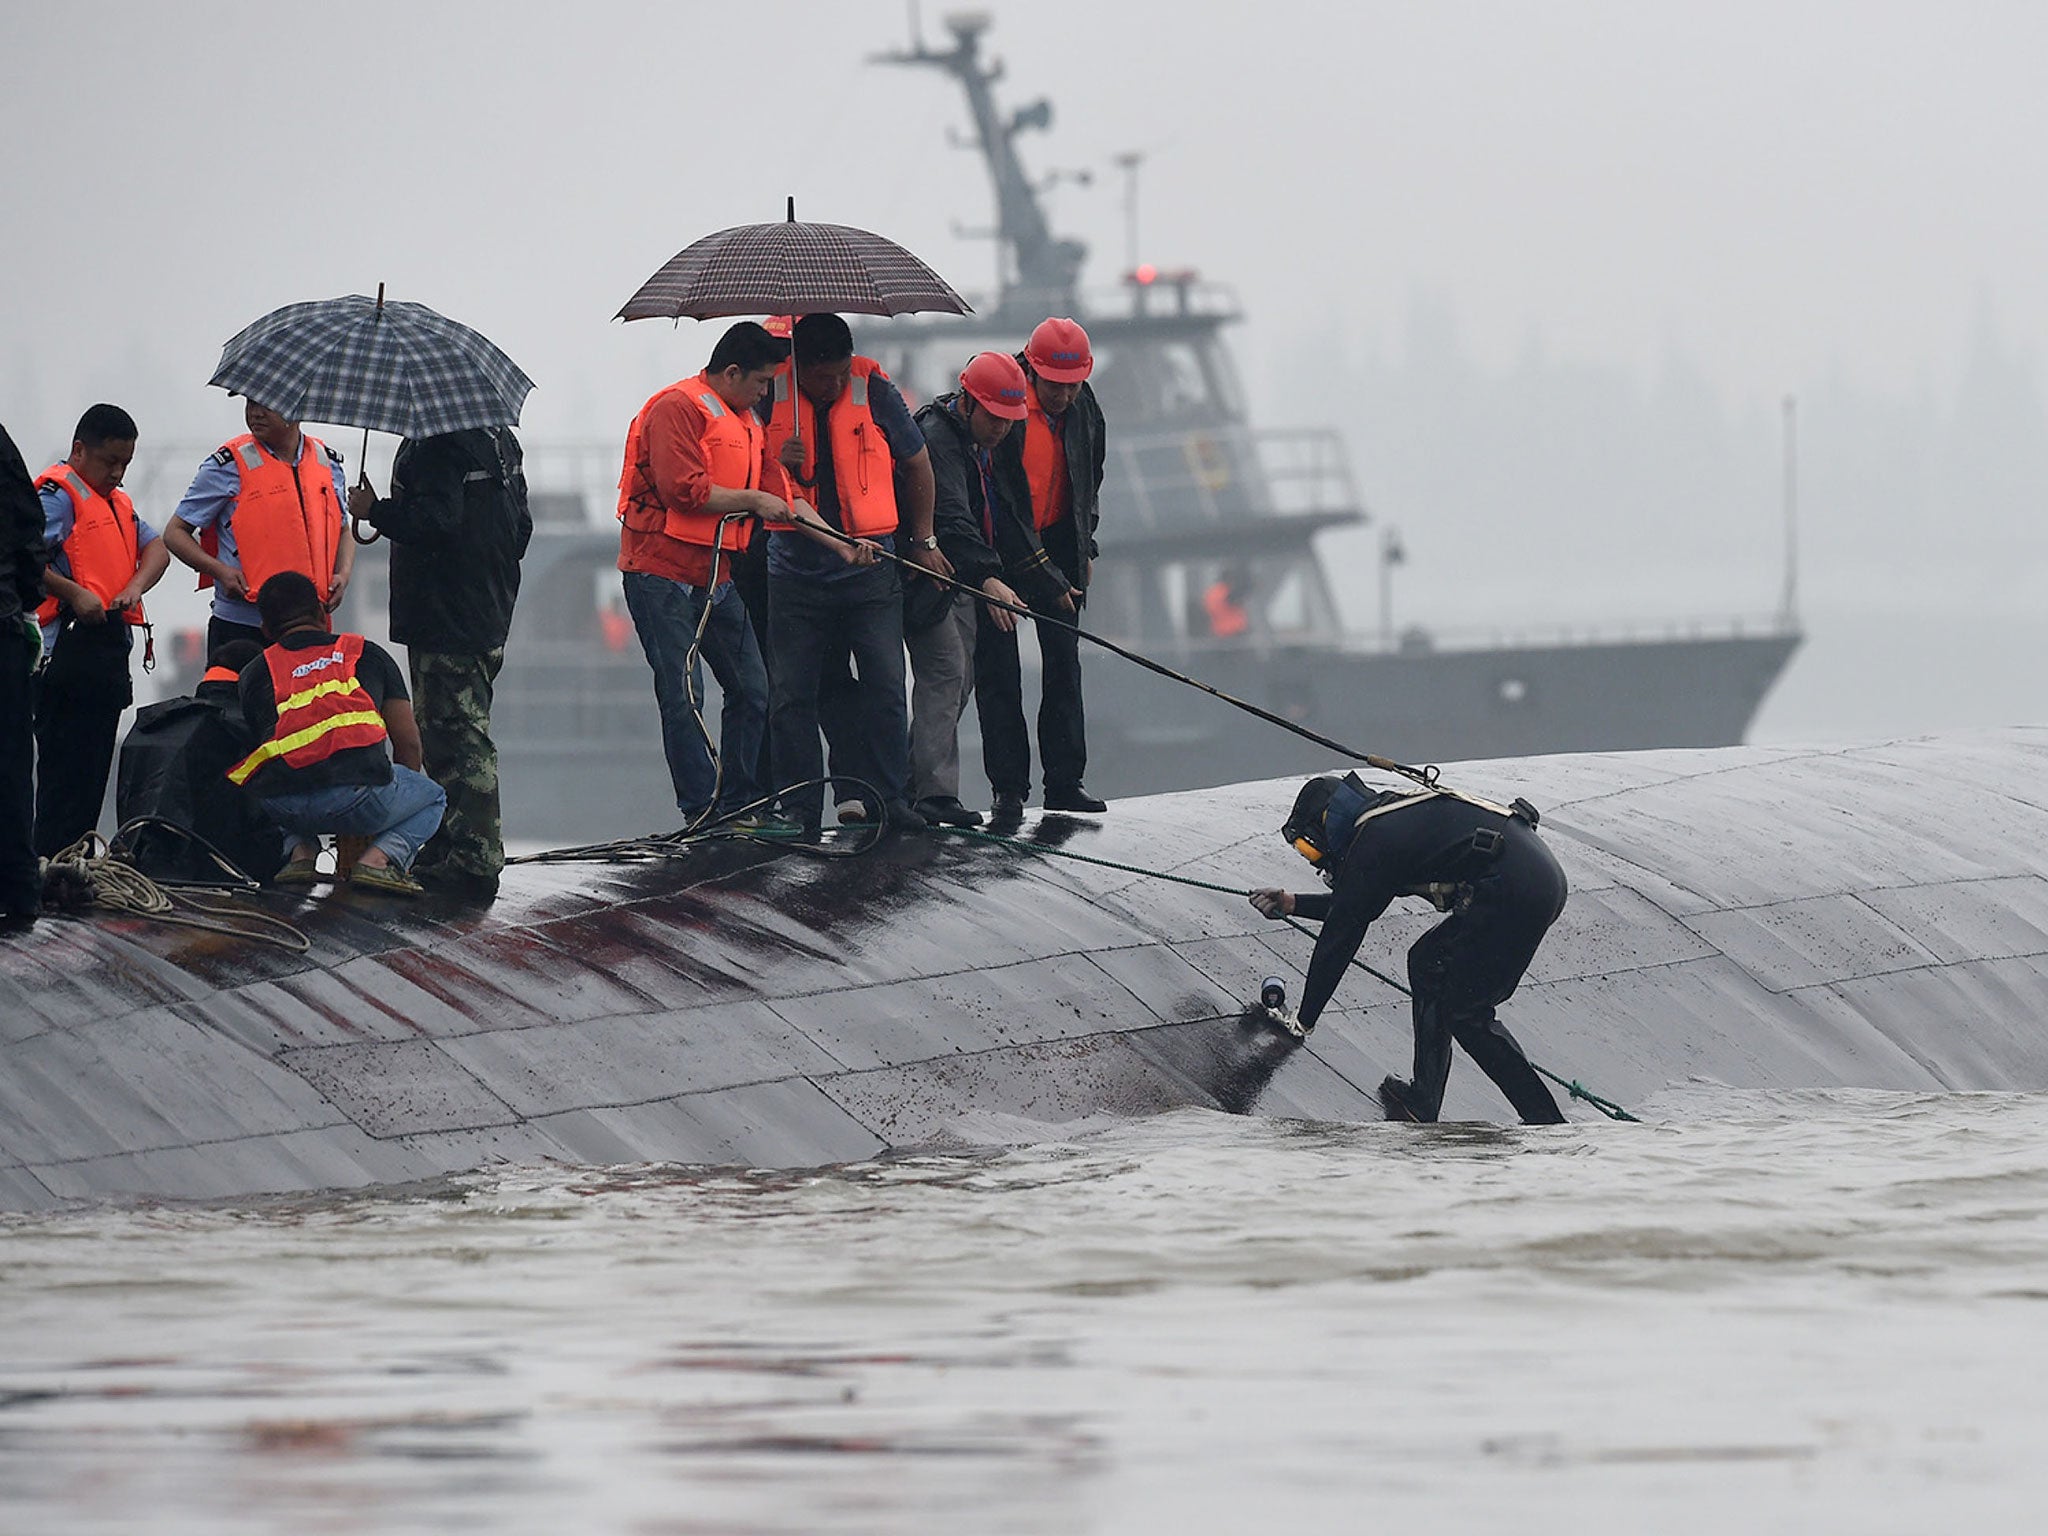 Rescuers work on the overturned passenger ship, which capsizes on Yangtze River, Hubei Province